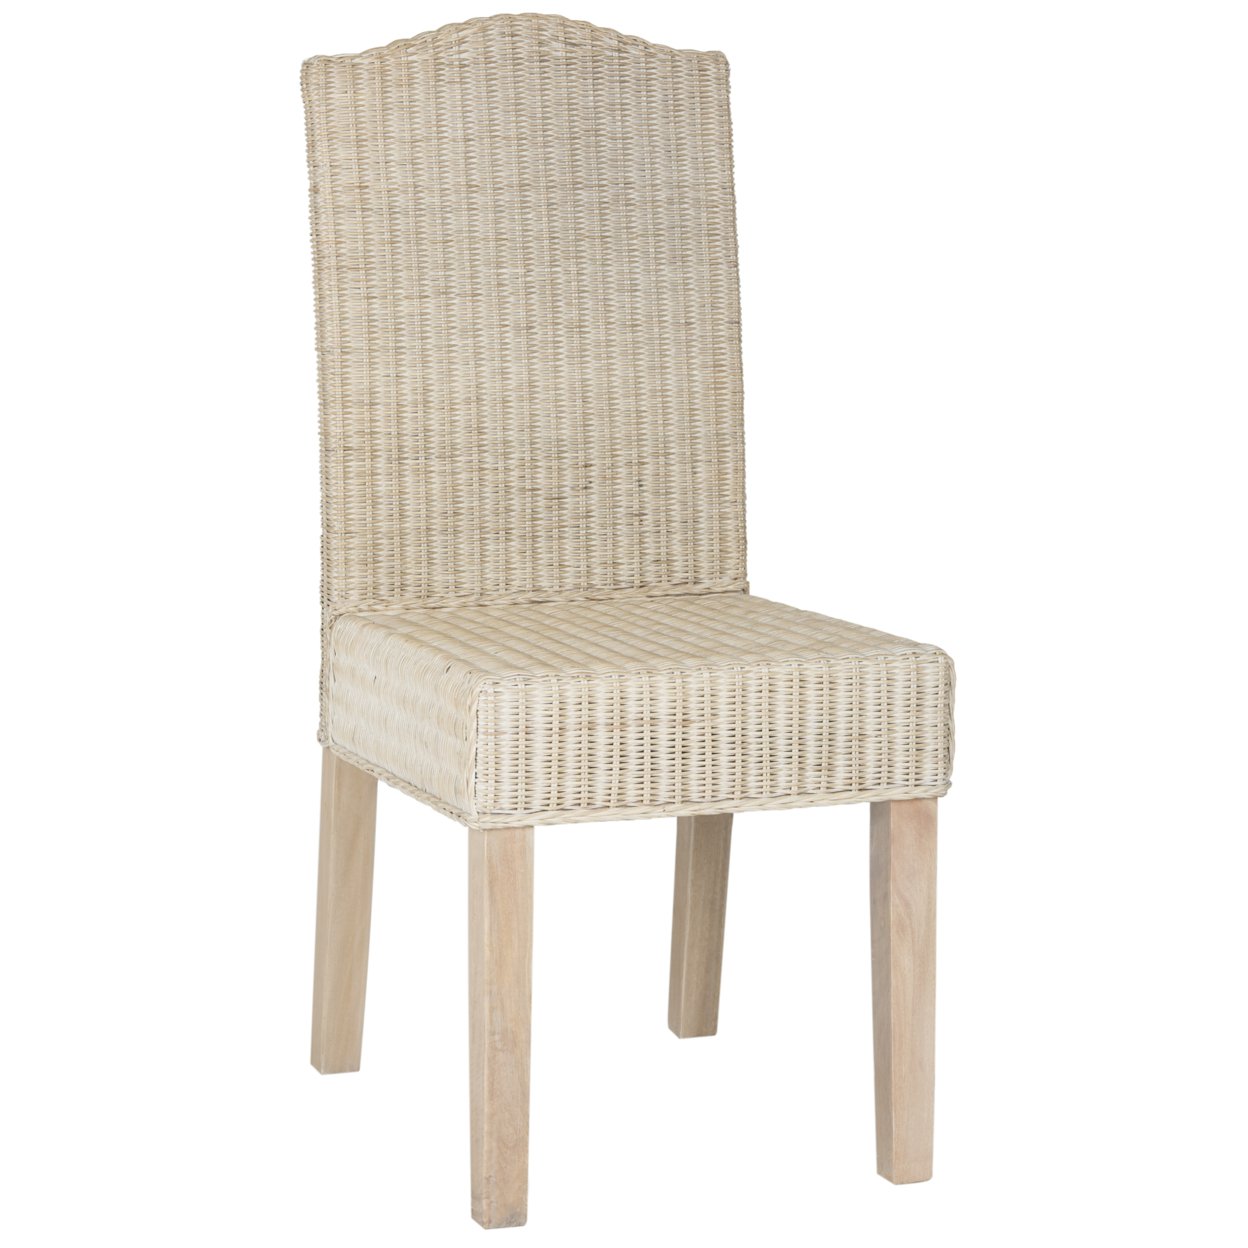 SAFAVIEH Odette 19''H Wicker Dining Chair White Washed